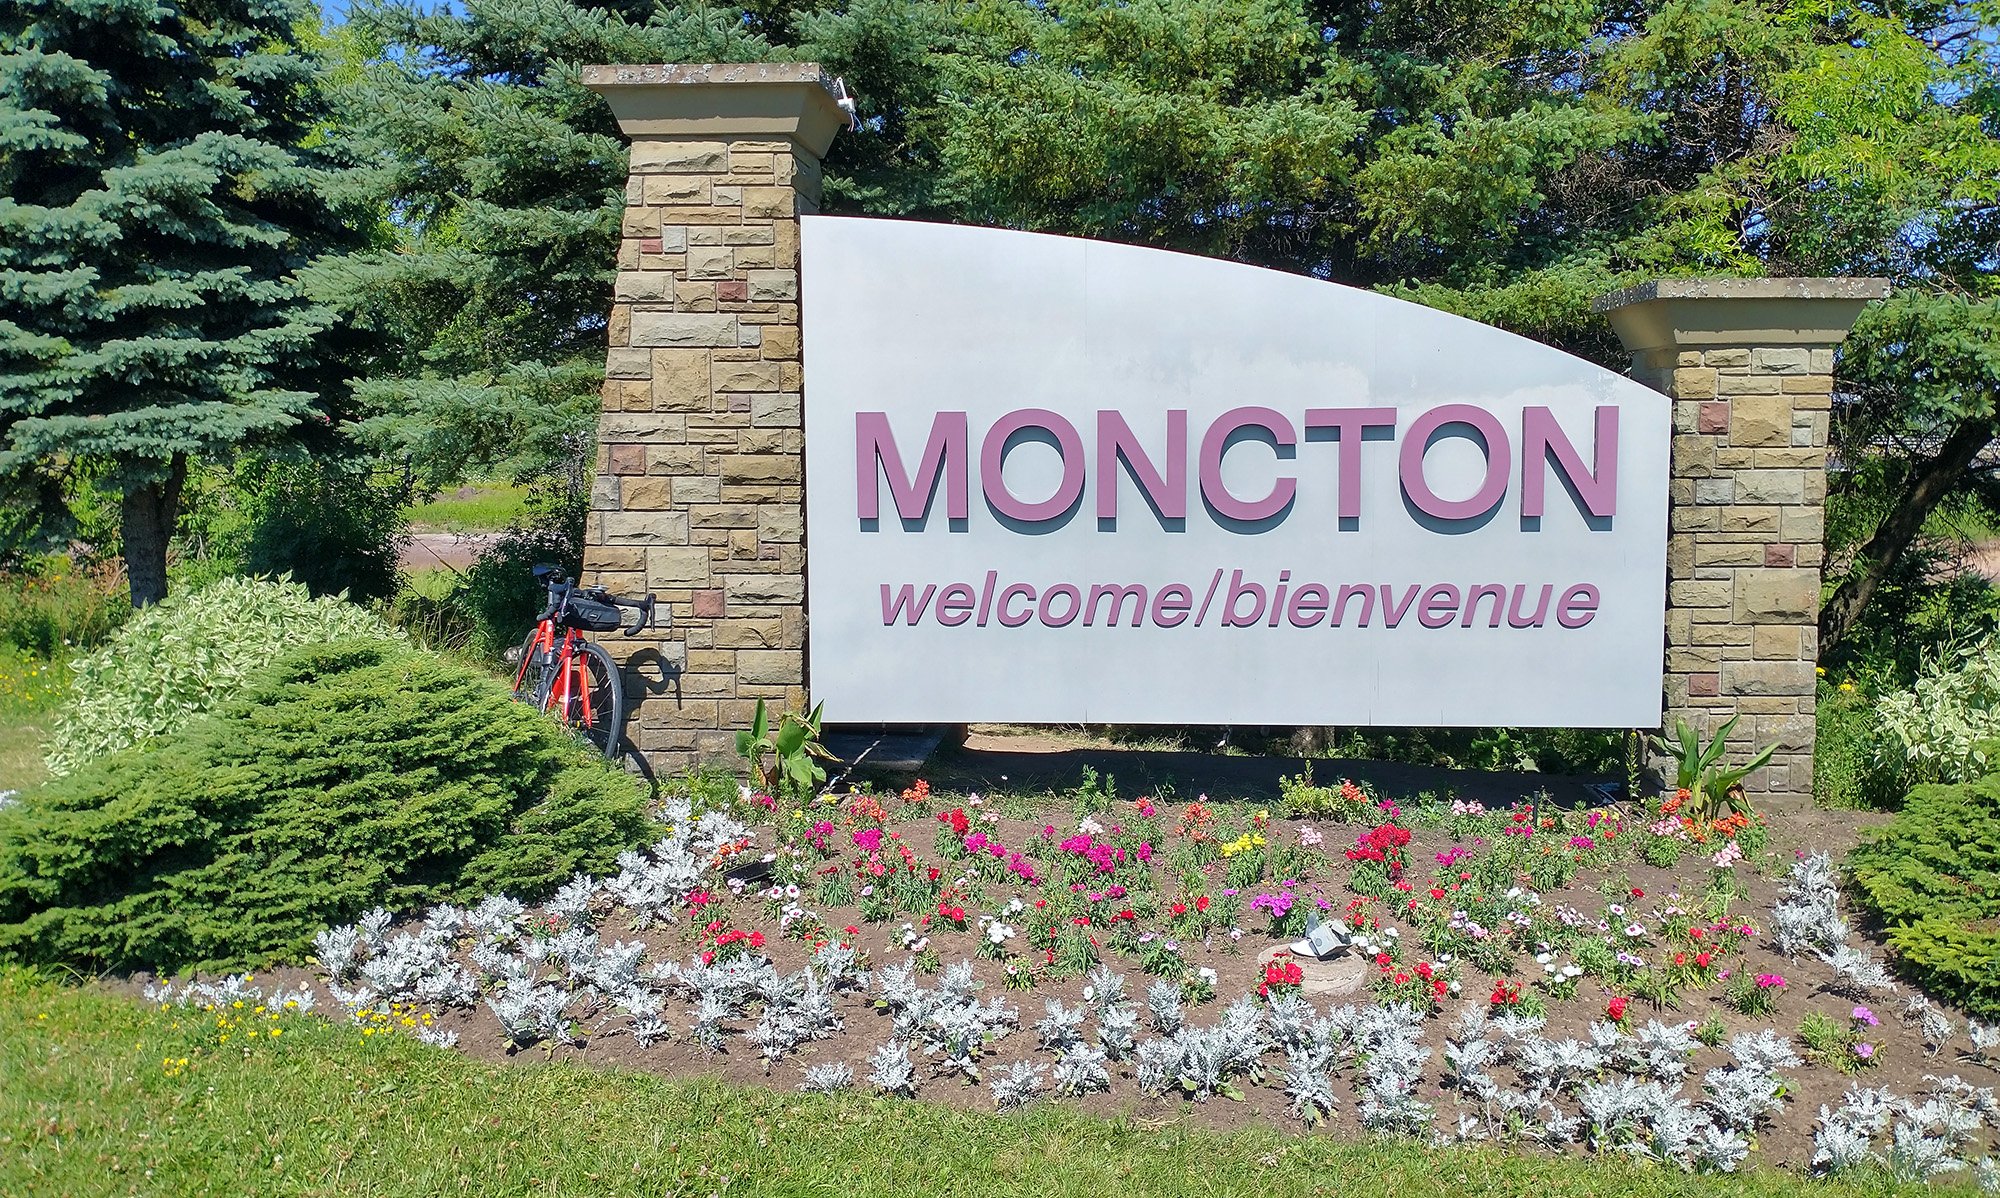 The Moncton city sign. Maybe I missed it but there doesn't seem to be any cool historic pier/downtown part to this city?